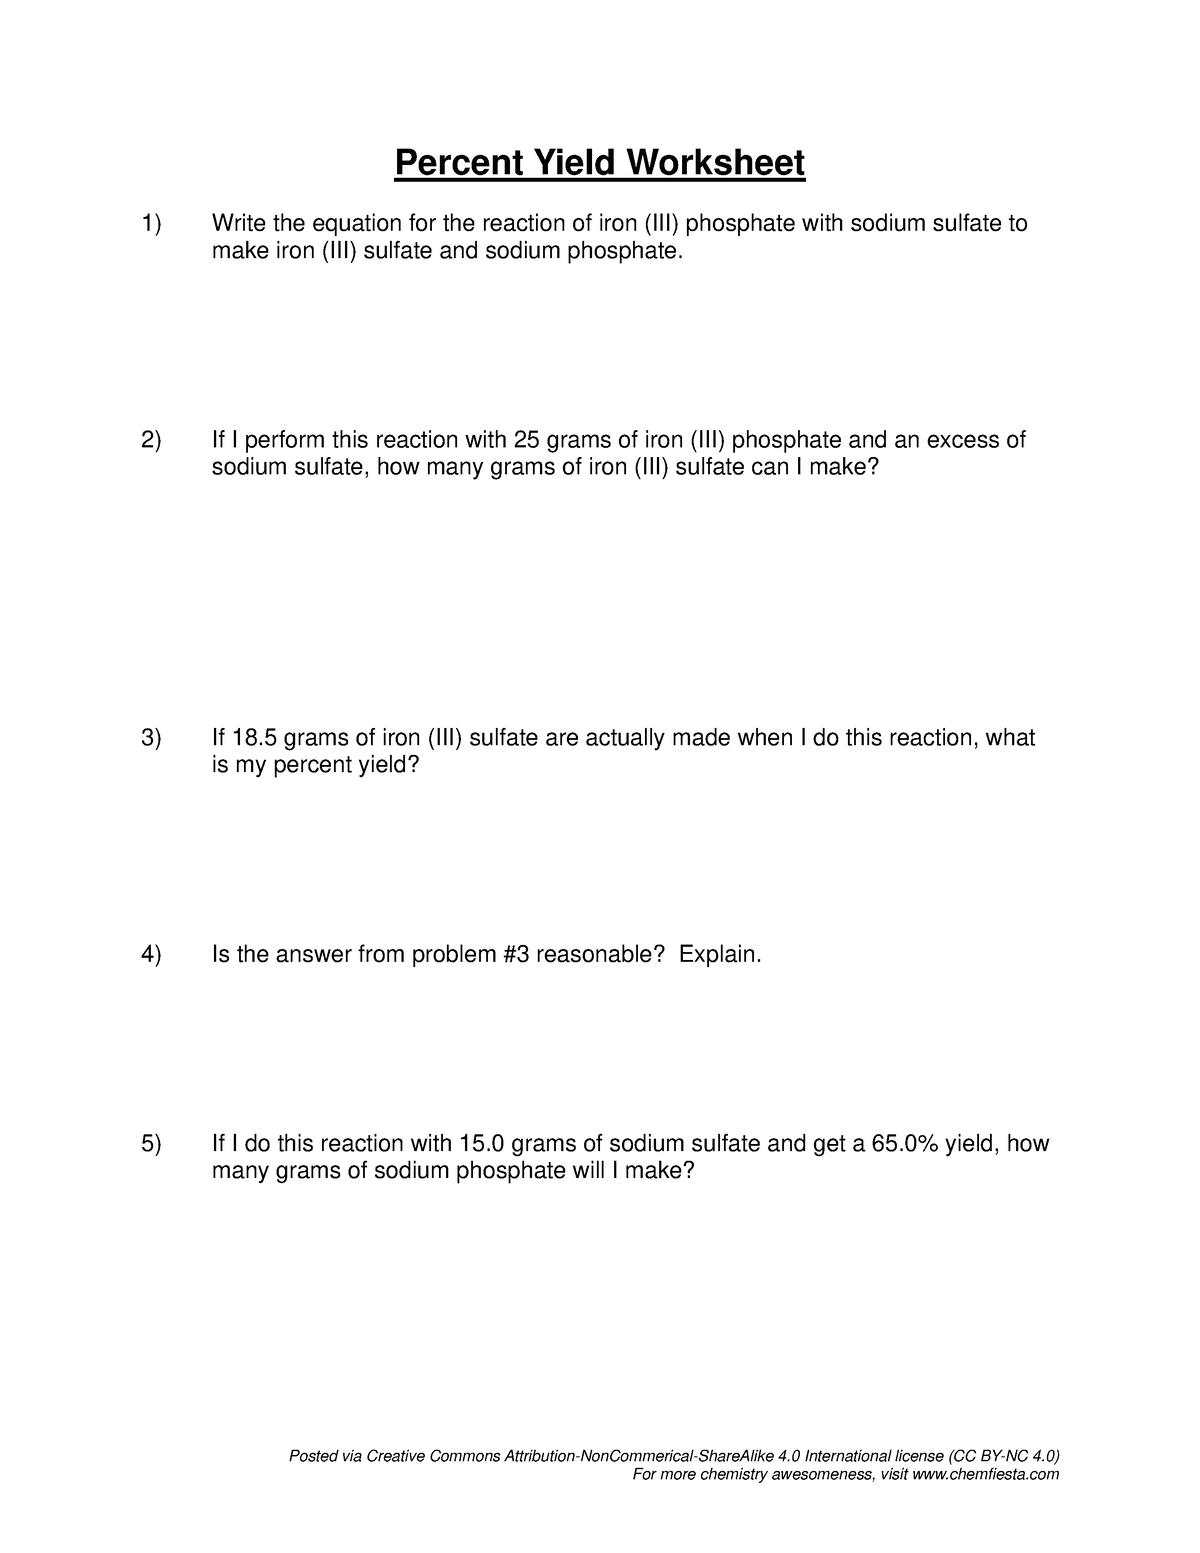 Percent-yield-worksheet - Posted via Creative Commons Attribution ...